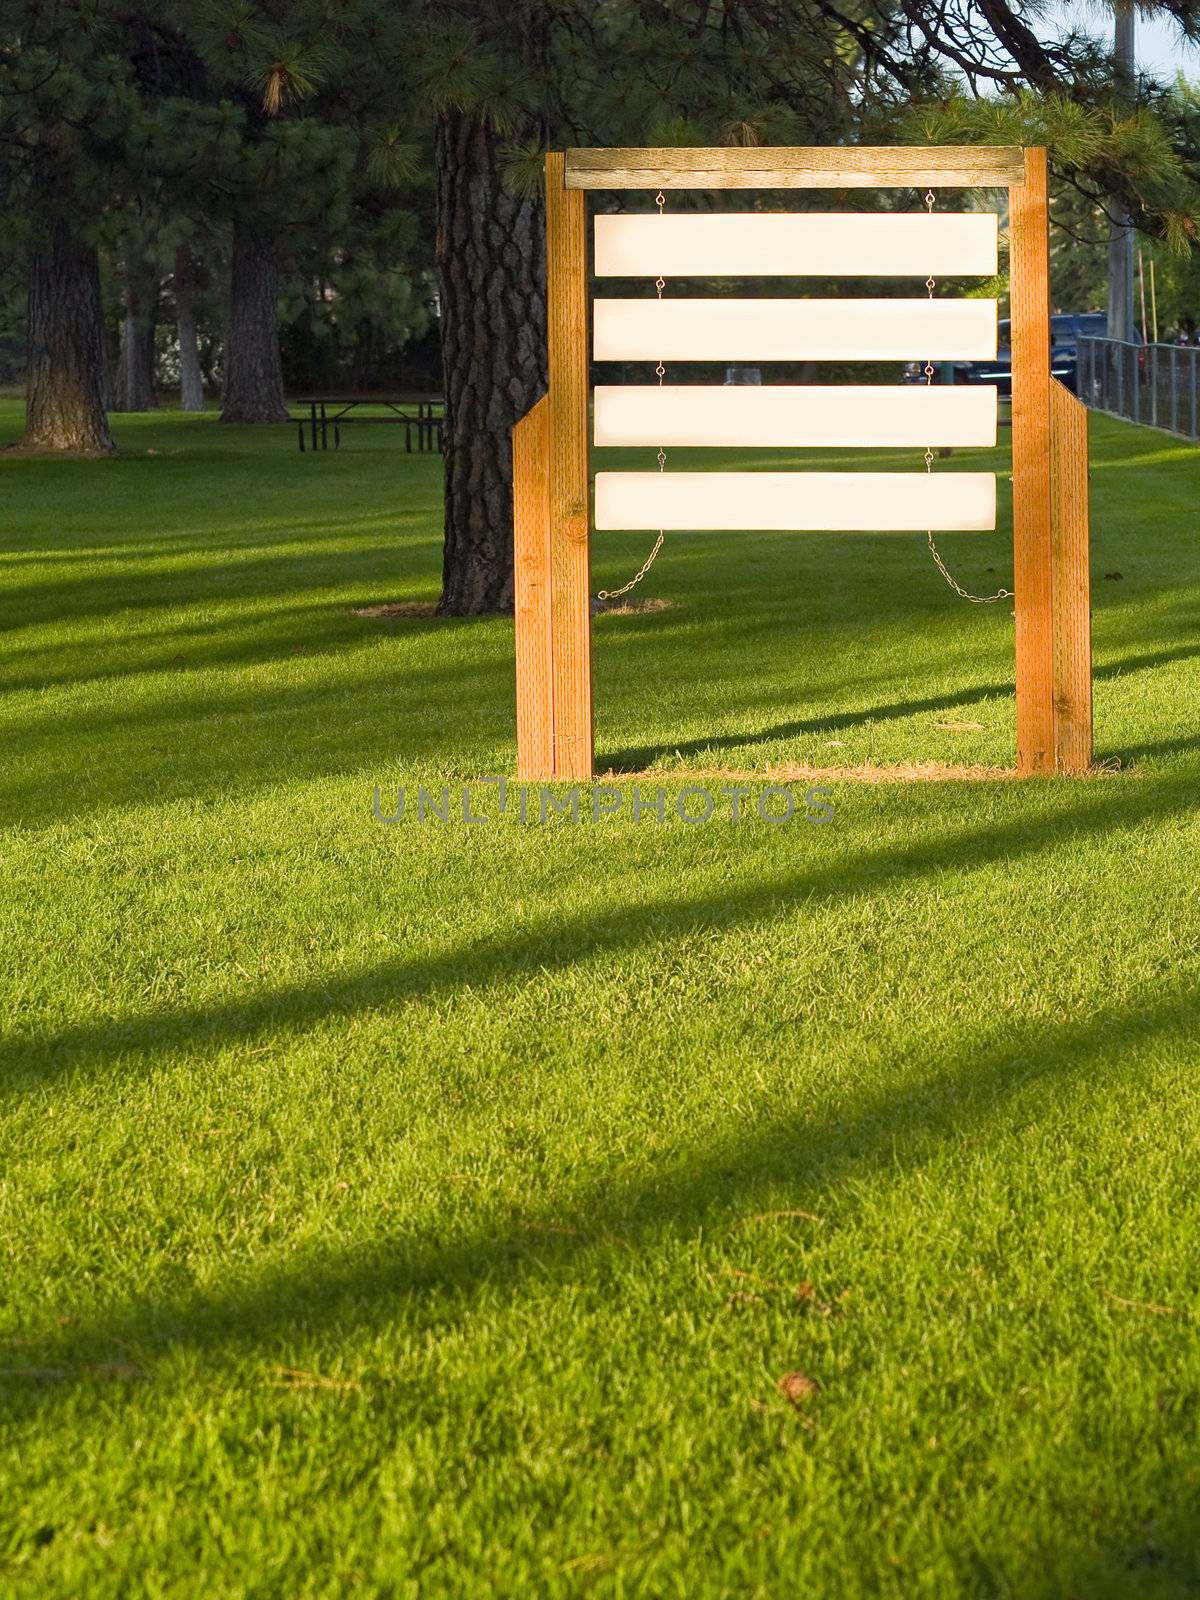 Blank Wooden Signs in a Sunlit Park